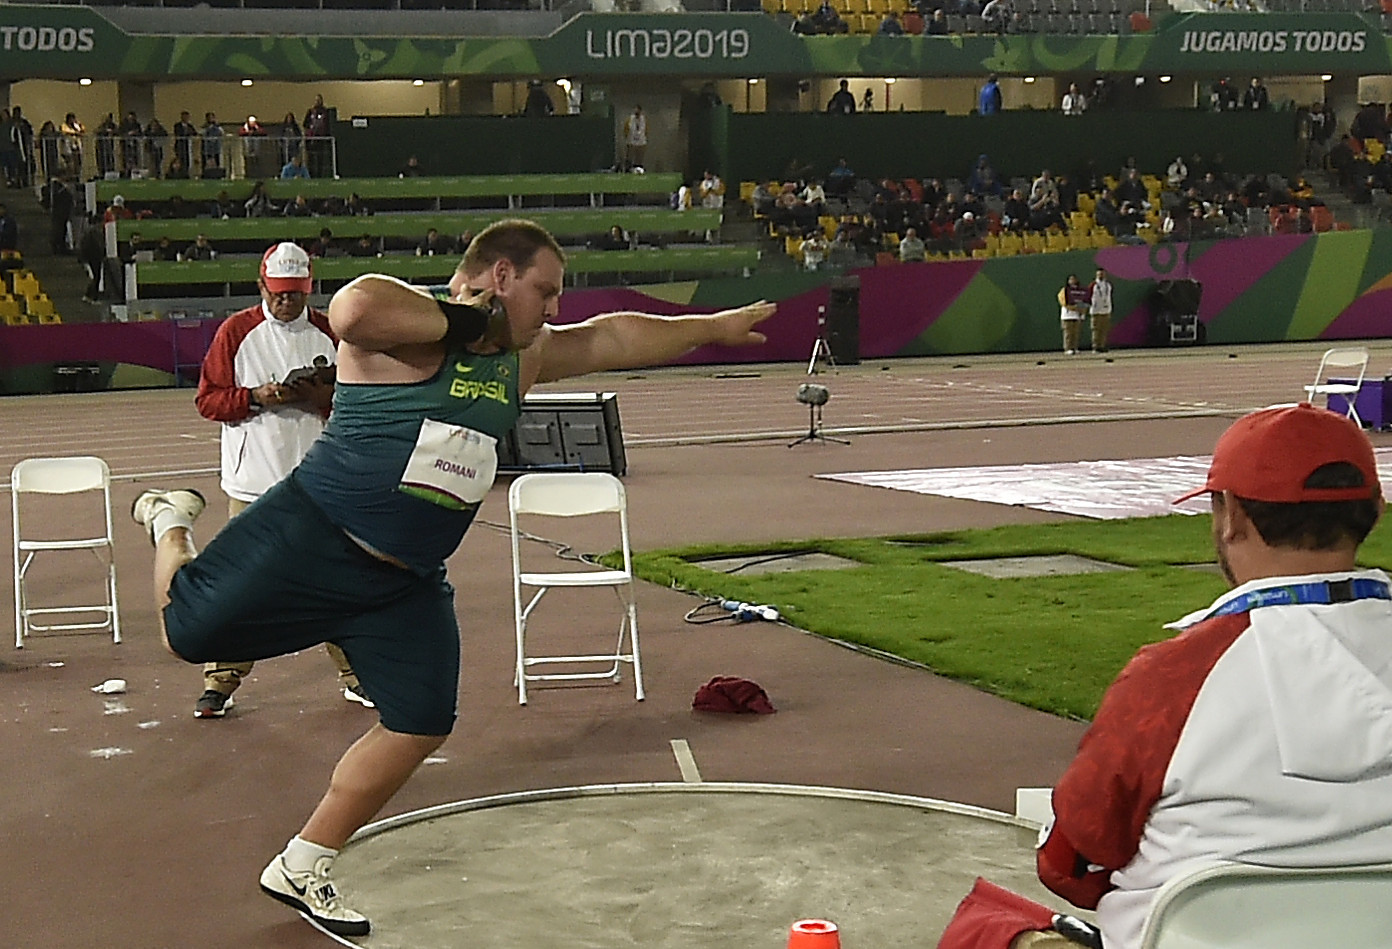 Brazil's Darlan Romani dominated the men's shot put ©Getty Images